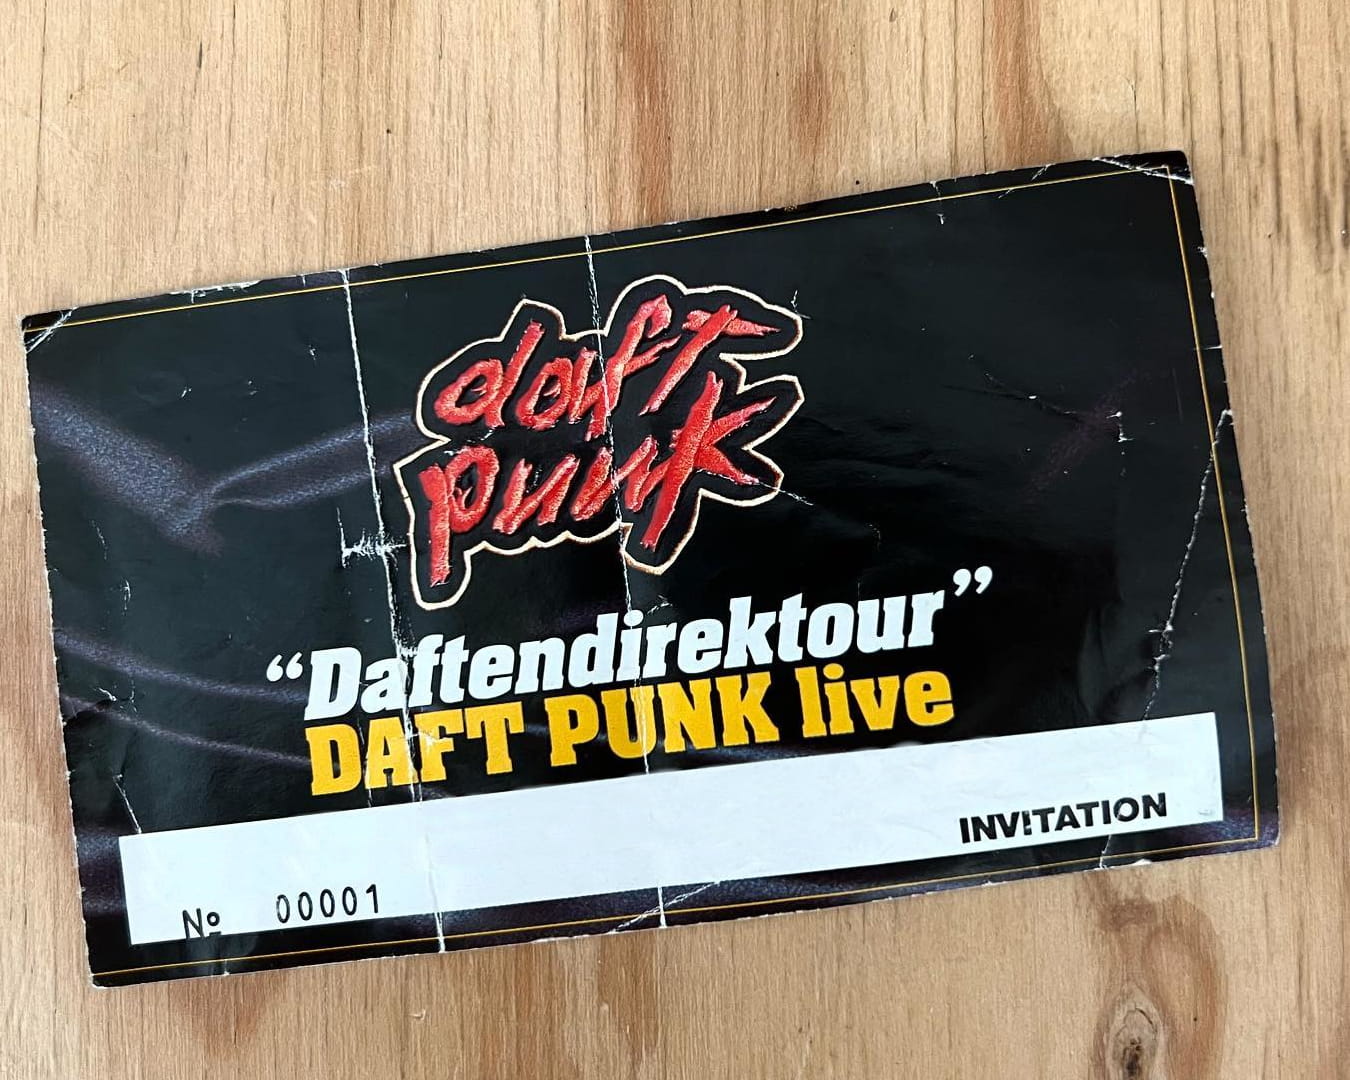 Photo of a ticket from Daft Punk's Daftendirektour in 1997, a show in Paris. Edited from original pic by edbangerrecords